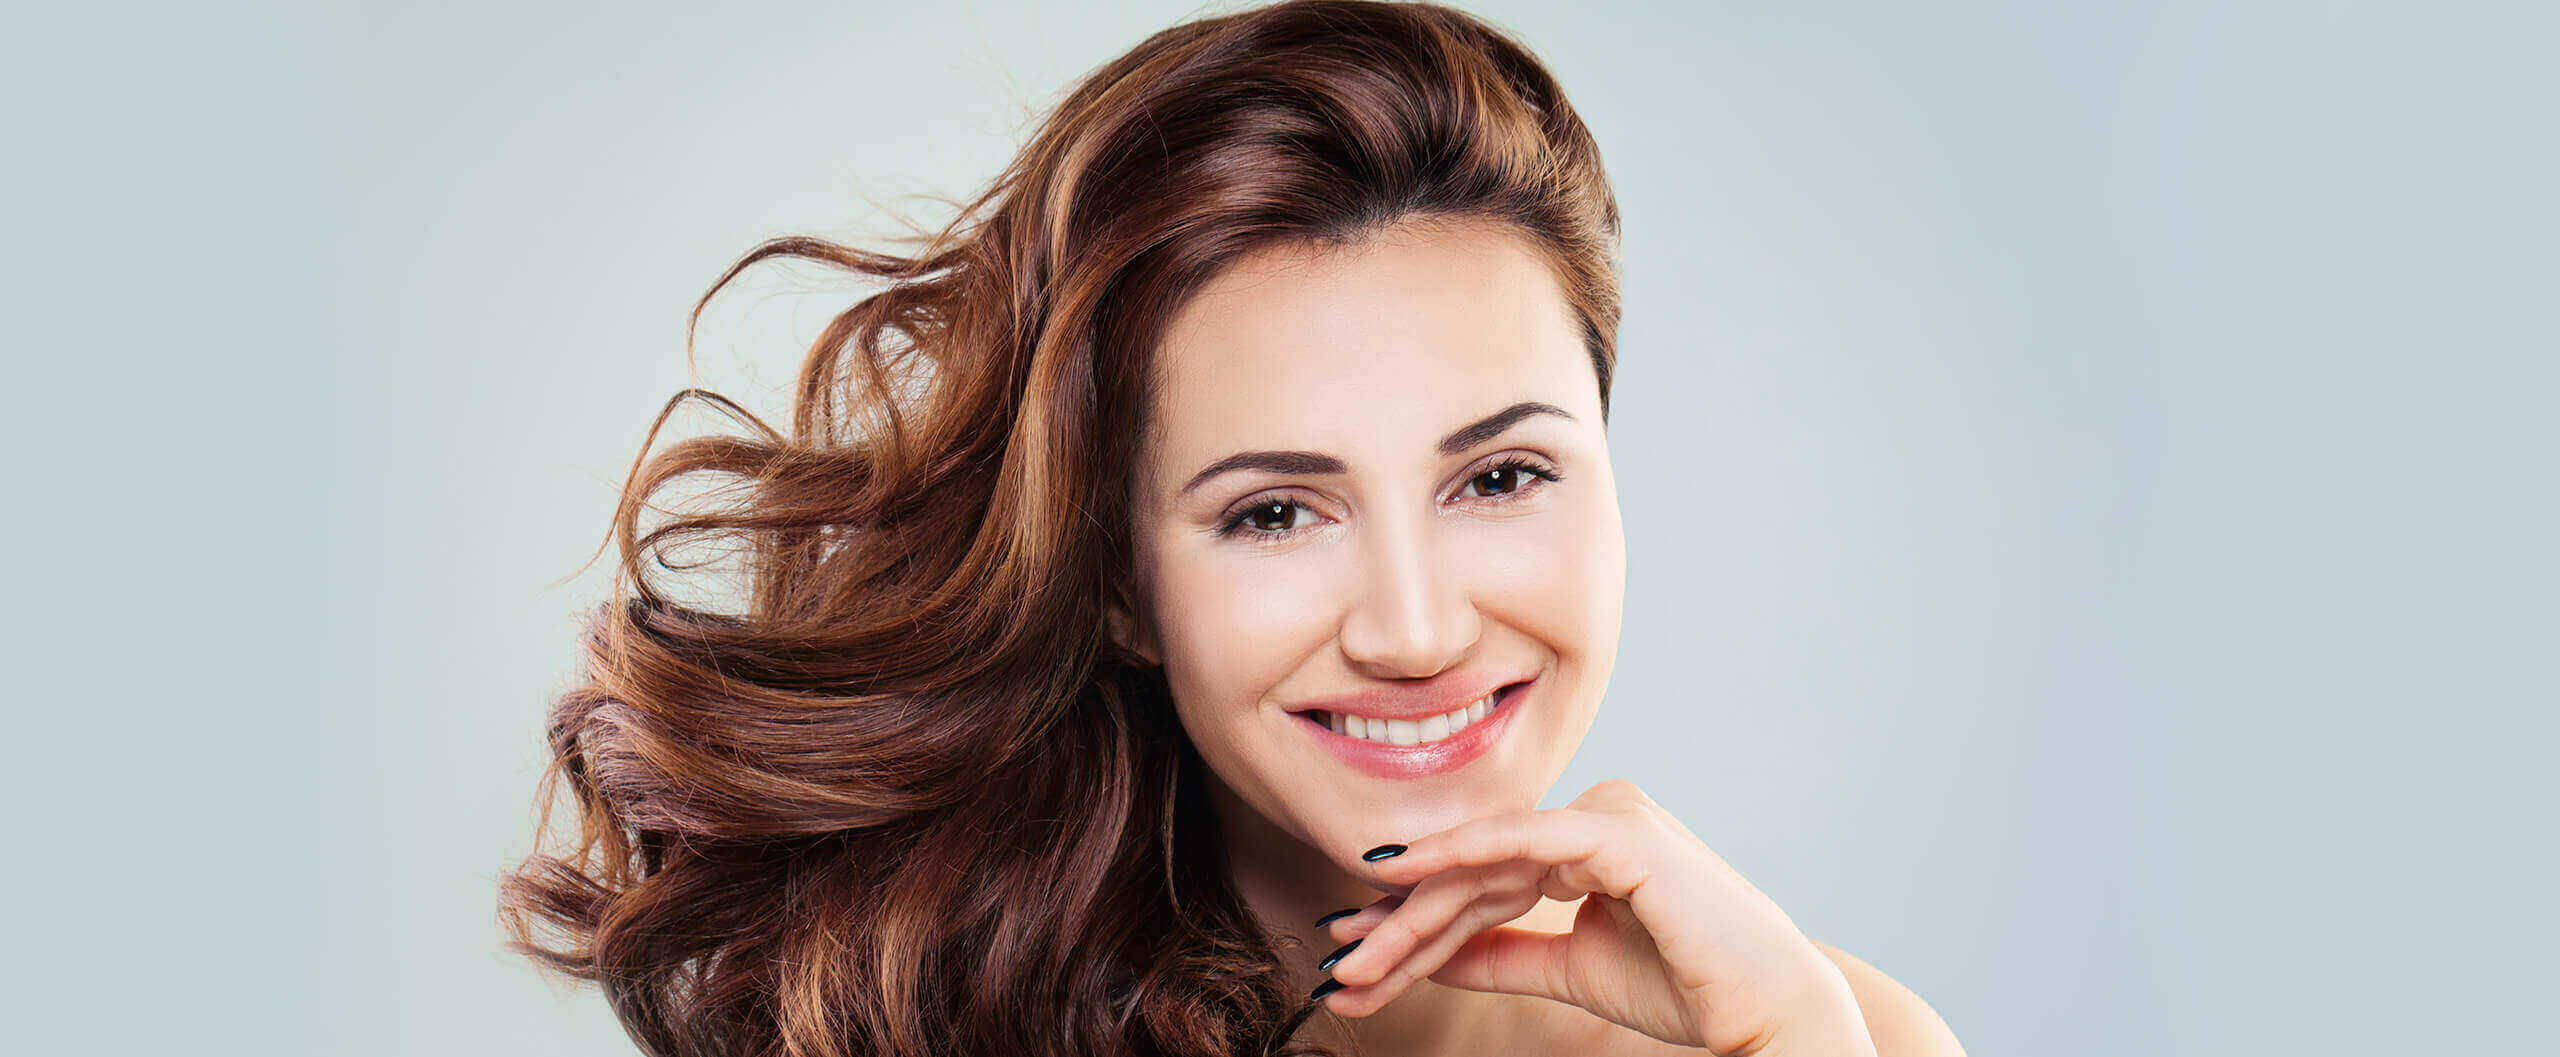 woman with beautiful white smile